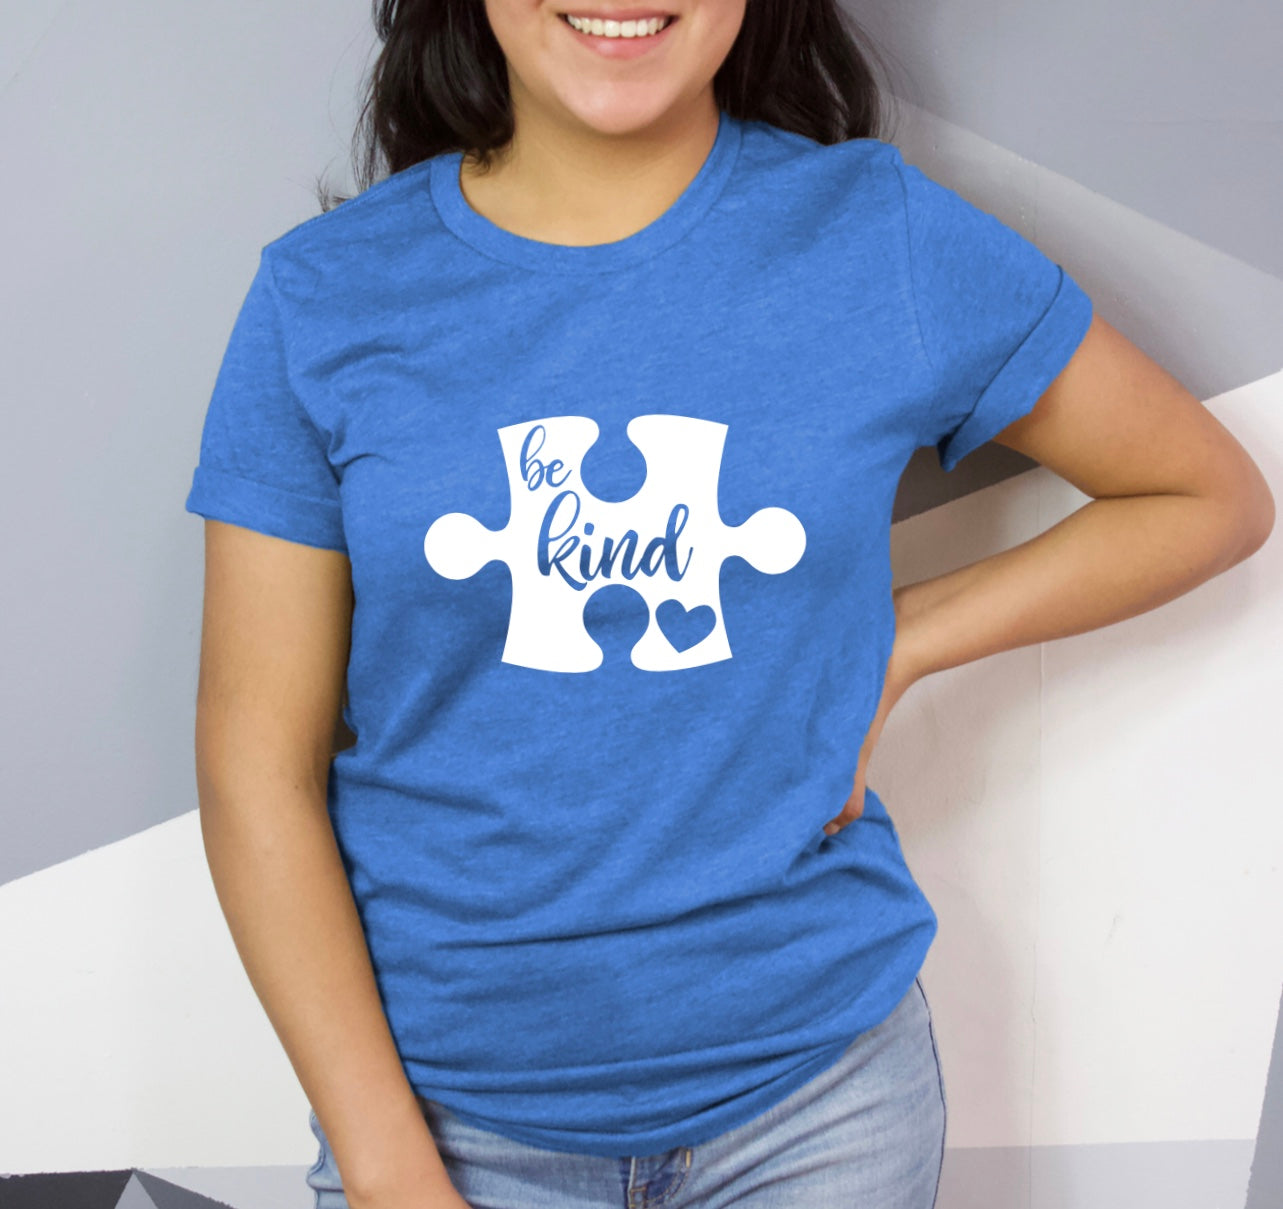 Be kind puzzle piece graphic t-shirt 